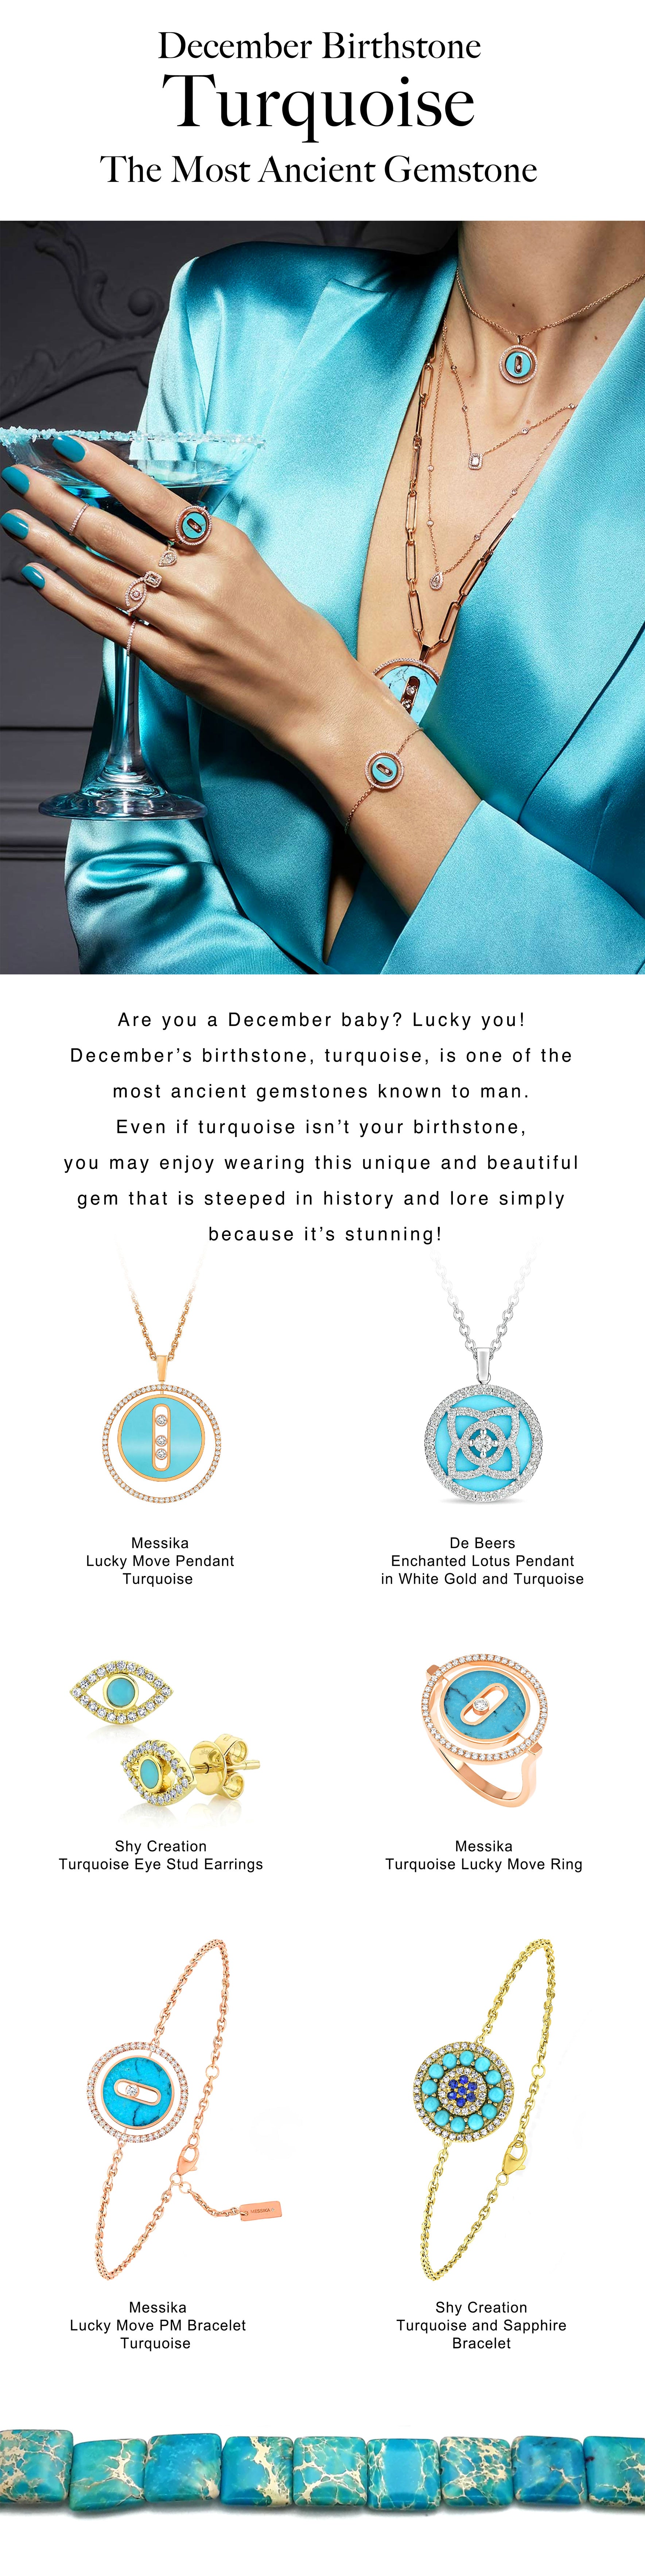 Turquoise: The December Birthstone